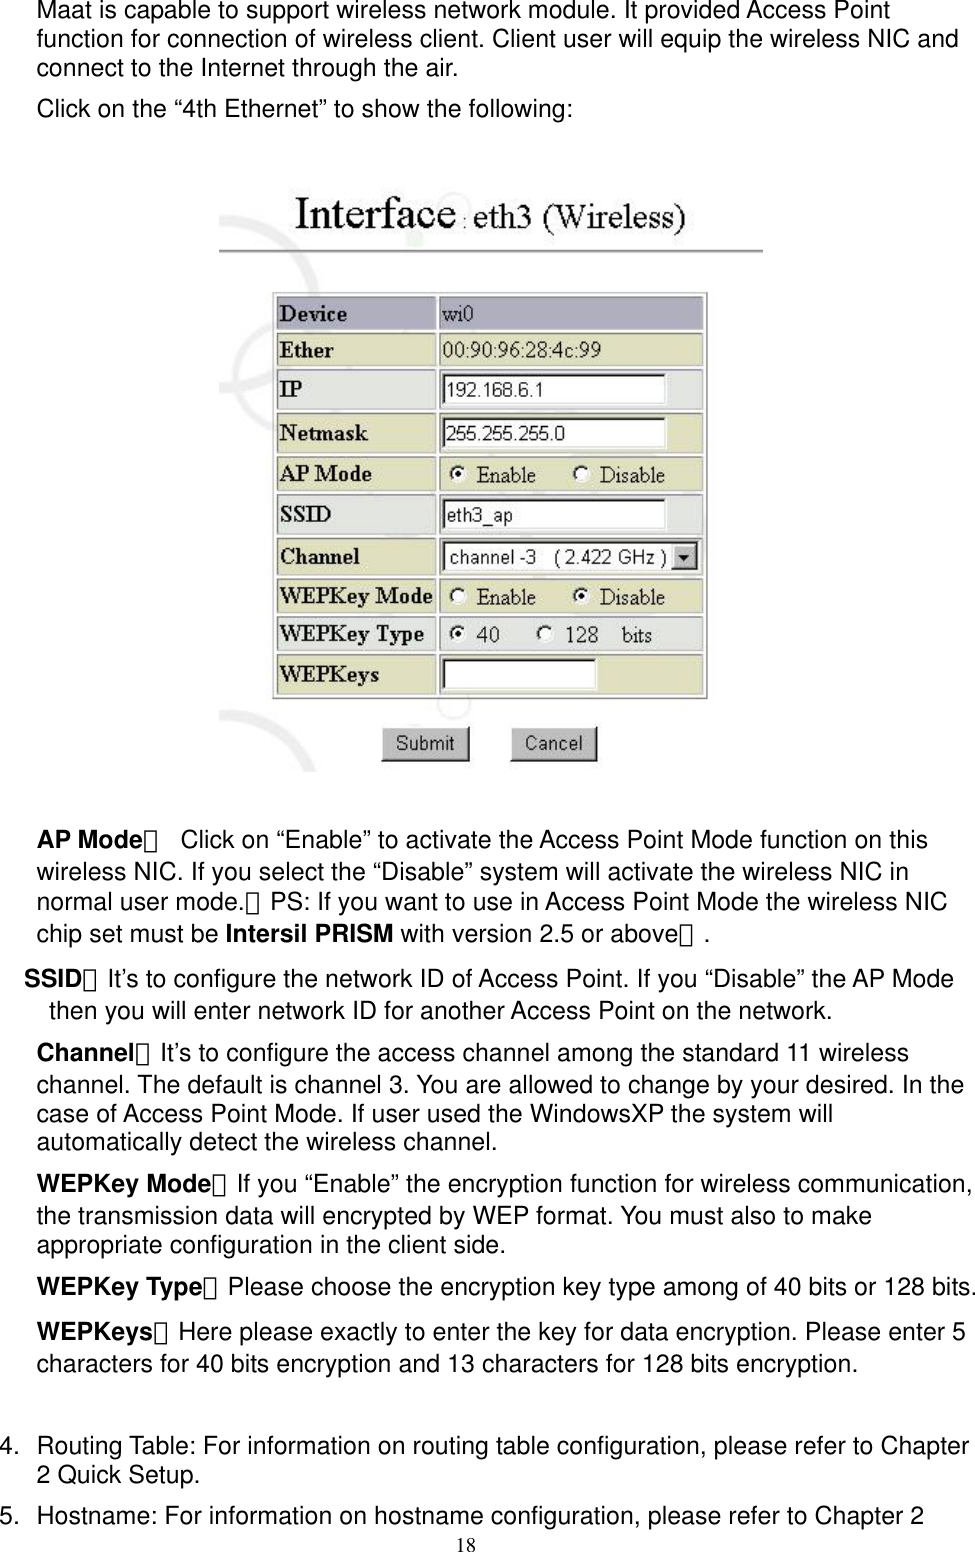  18Maat is capable to support wireless network module. It provided Access Point function for connection of wireless client. Client user will equip the wireless NIC and connect to the Internet through the air.   Click on the “4th Ethernet” to show the following:    AP Mode：  Click on “Enable” to activate the Access Point Mode function on this wireless NIC. If you select the “Disable” system will activate the wireless NIC in normal user mode.（PS: If you want to use in Access Point Mode the wireless NIC   chip set must be Intersil PRISM with version 2.5 or above）. SSID：It’s to configure the network ID of Access Point. If you “Disable” the AP Mode then you will enter network ID for another Access Point on the network. Channel：It’s to configure the access channel among the standard 11 wireless channel. The default is channel 3. You are allowed to change by your desired. In the case of Access Point Mode. If user used the WindowsXP the system will automatically detect the wireless channel. WEPKey Mode：If you “Enable” the encryption function for wireless communication, the transmission data will encrypted by WEP format. You must also to make appropriate configuration in the client side. WEPKey Type：Please choose the encryption key type among of 40 bits or 128 bits. WEPKeys：Here please exactly to enter the key for data encryption. Please enter 5 characters for 40 bits encryption and 13 characters for 128 bits encryption.    4.  Routing Table: For information on routing table configuration, please refer to Chapter 2 Quick Setup. 5.  Hostname: For information on hostname configuration, please refer to Chapter 2 